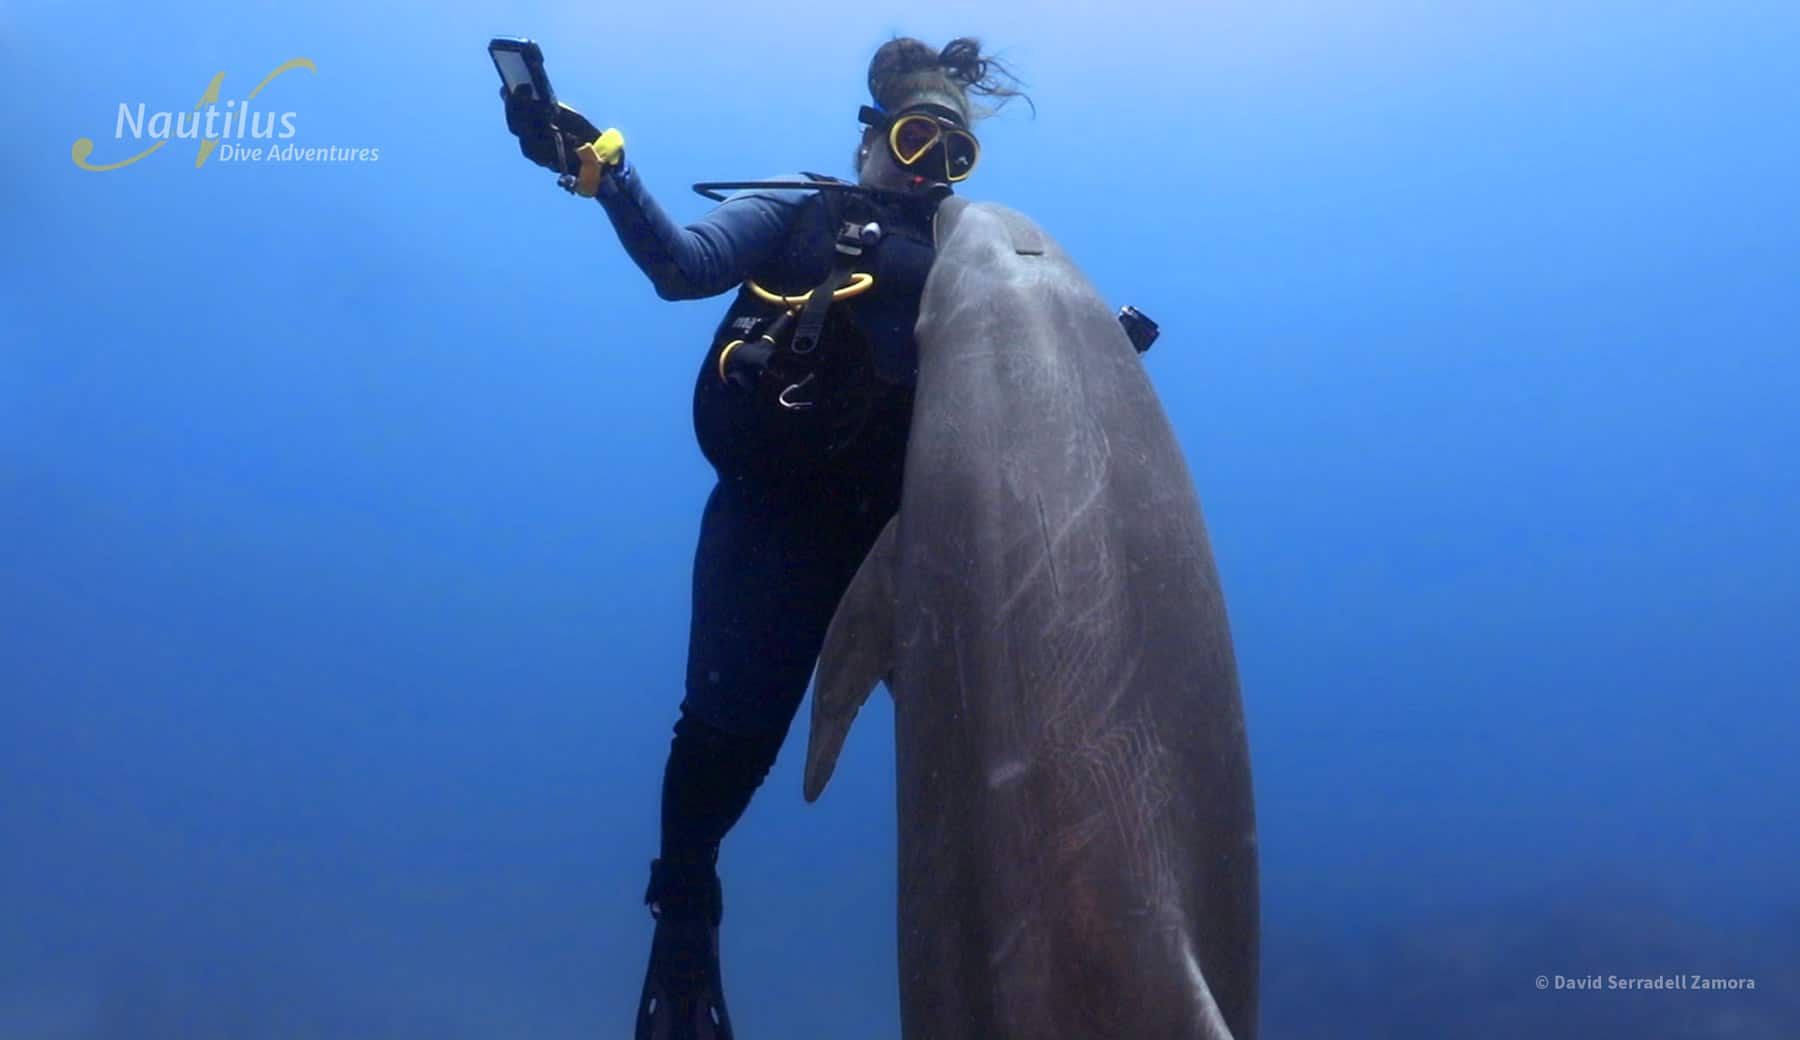 Friendly dolphin interact with diver